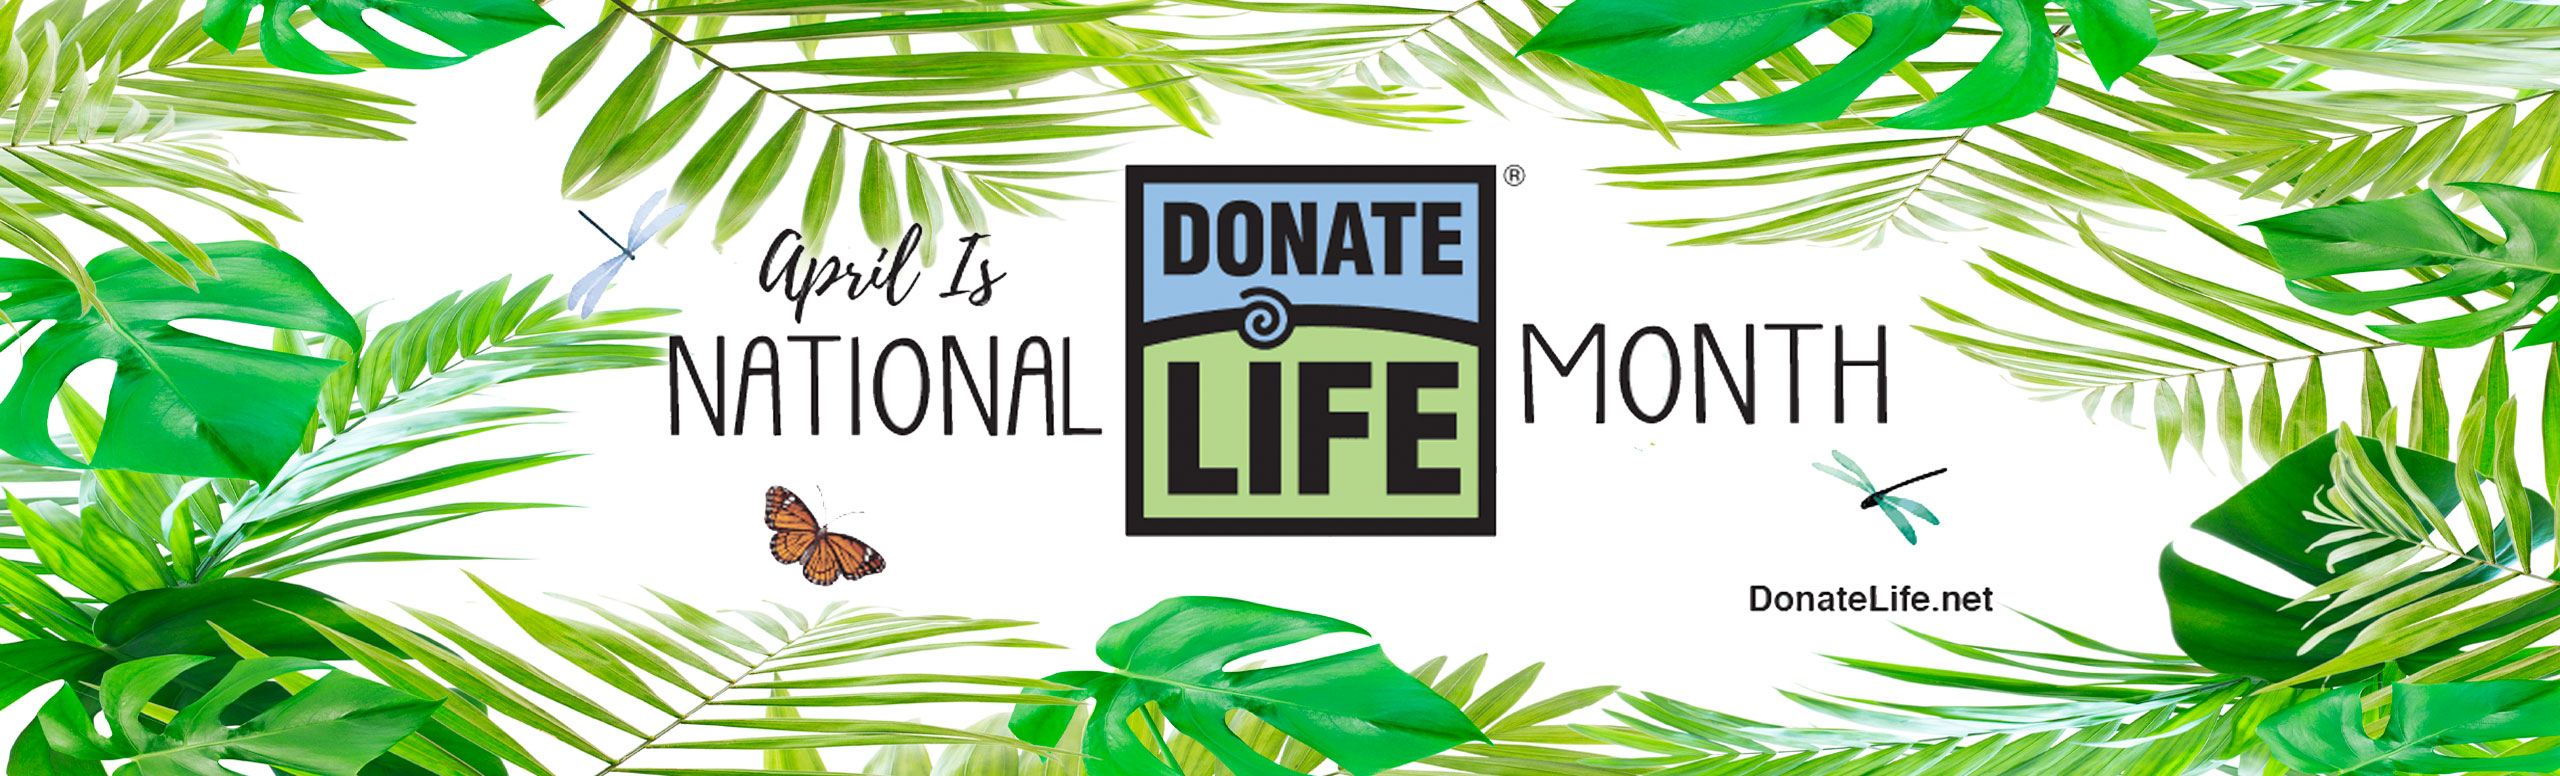 Banner picture of leafs from plants, two dragonflies, and one butterfly. Banner says:
April is National Donate Life Month.